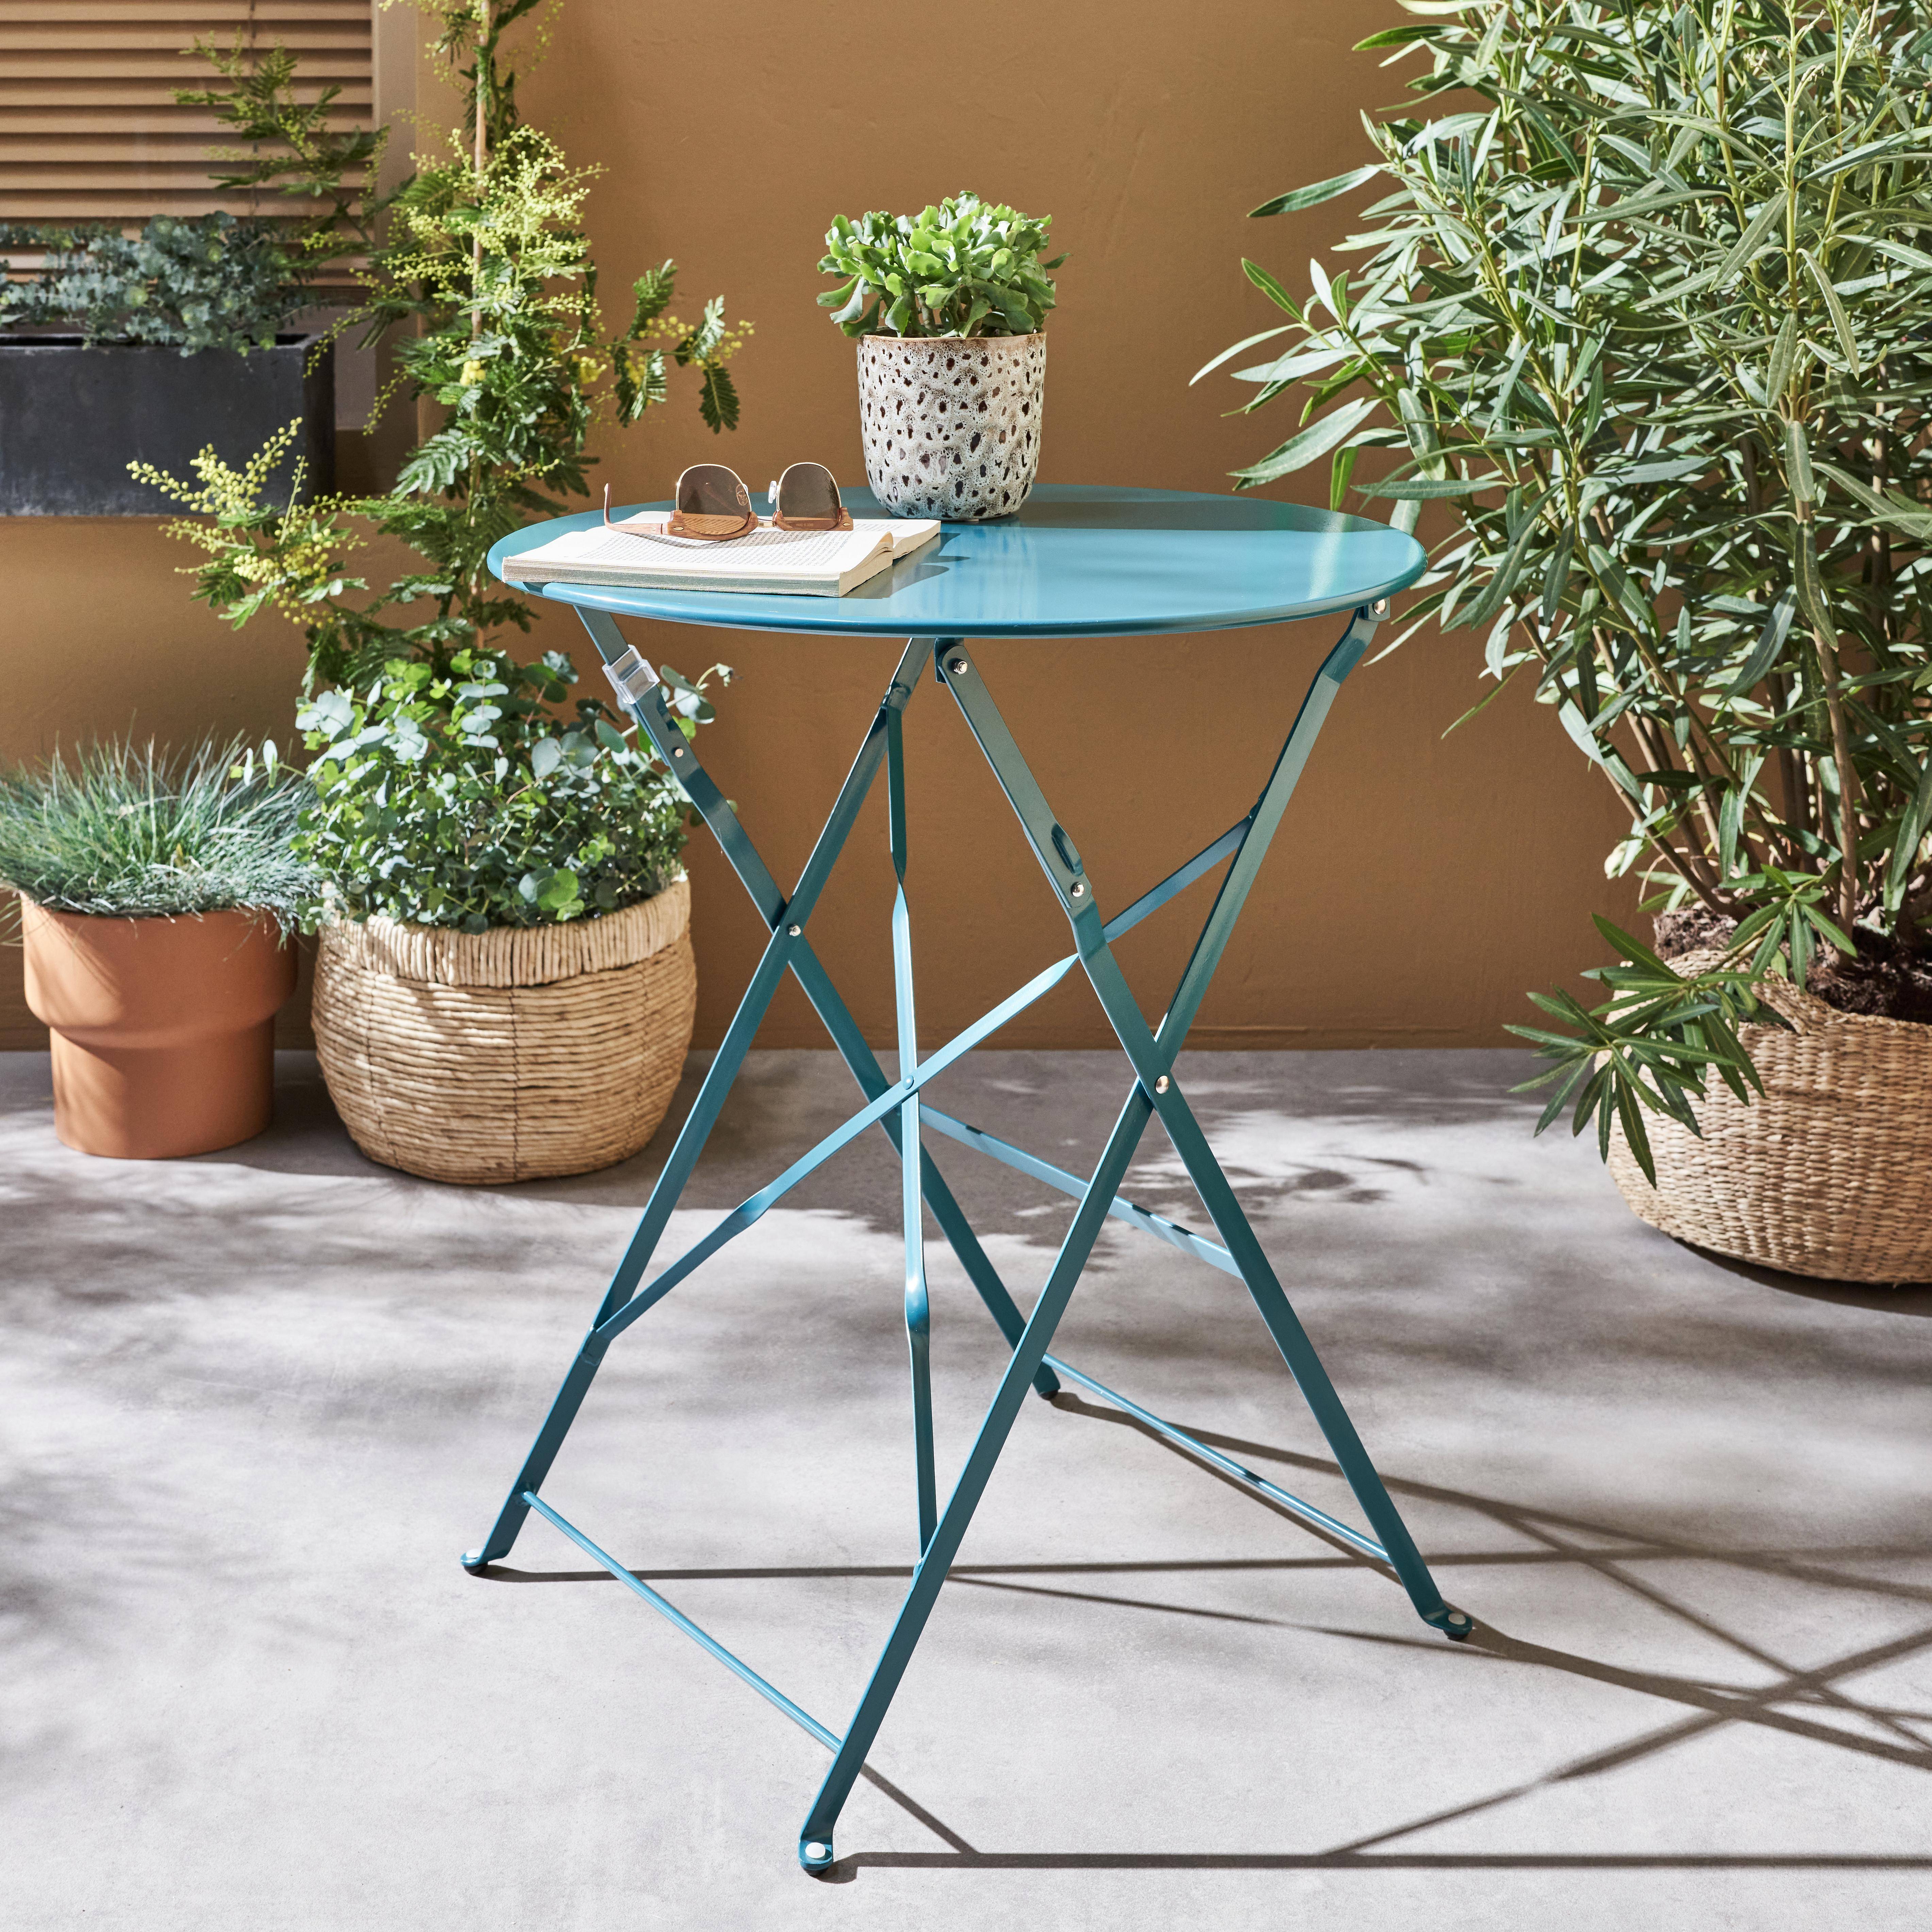 Foldable bistro garden table - Round Emilia duck blue - Round table Ø60cm, thermo-lacquered steel,sweeek,Photo1